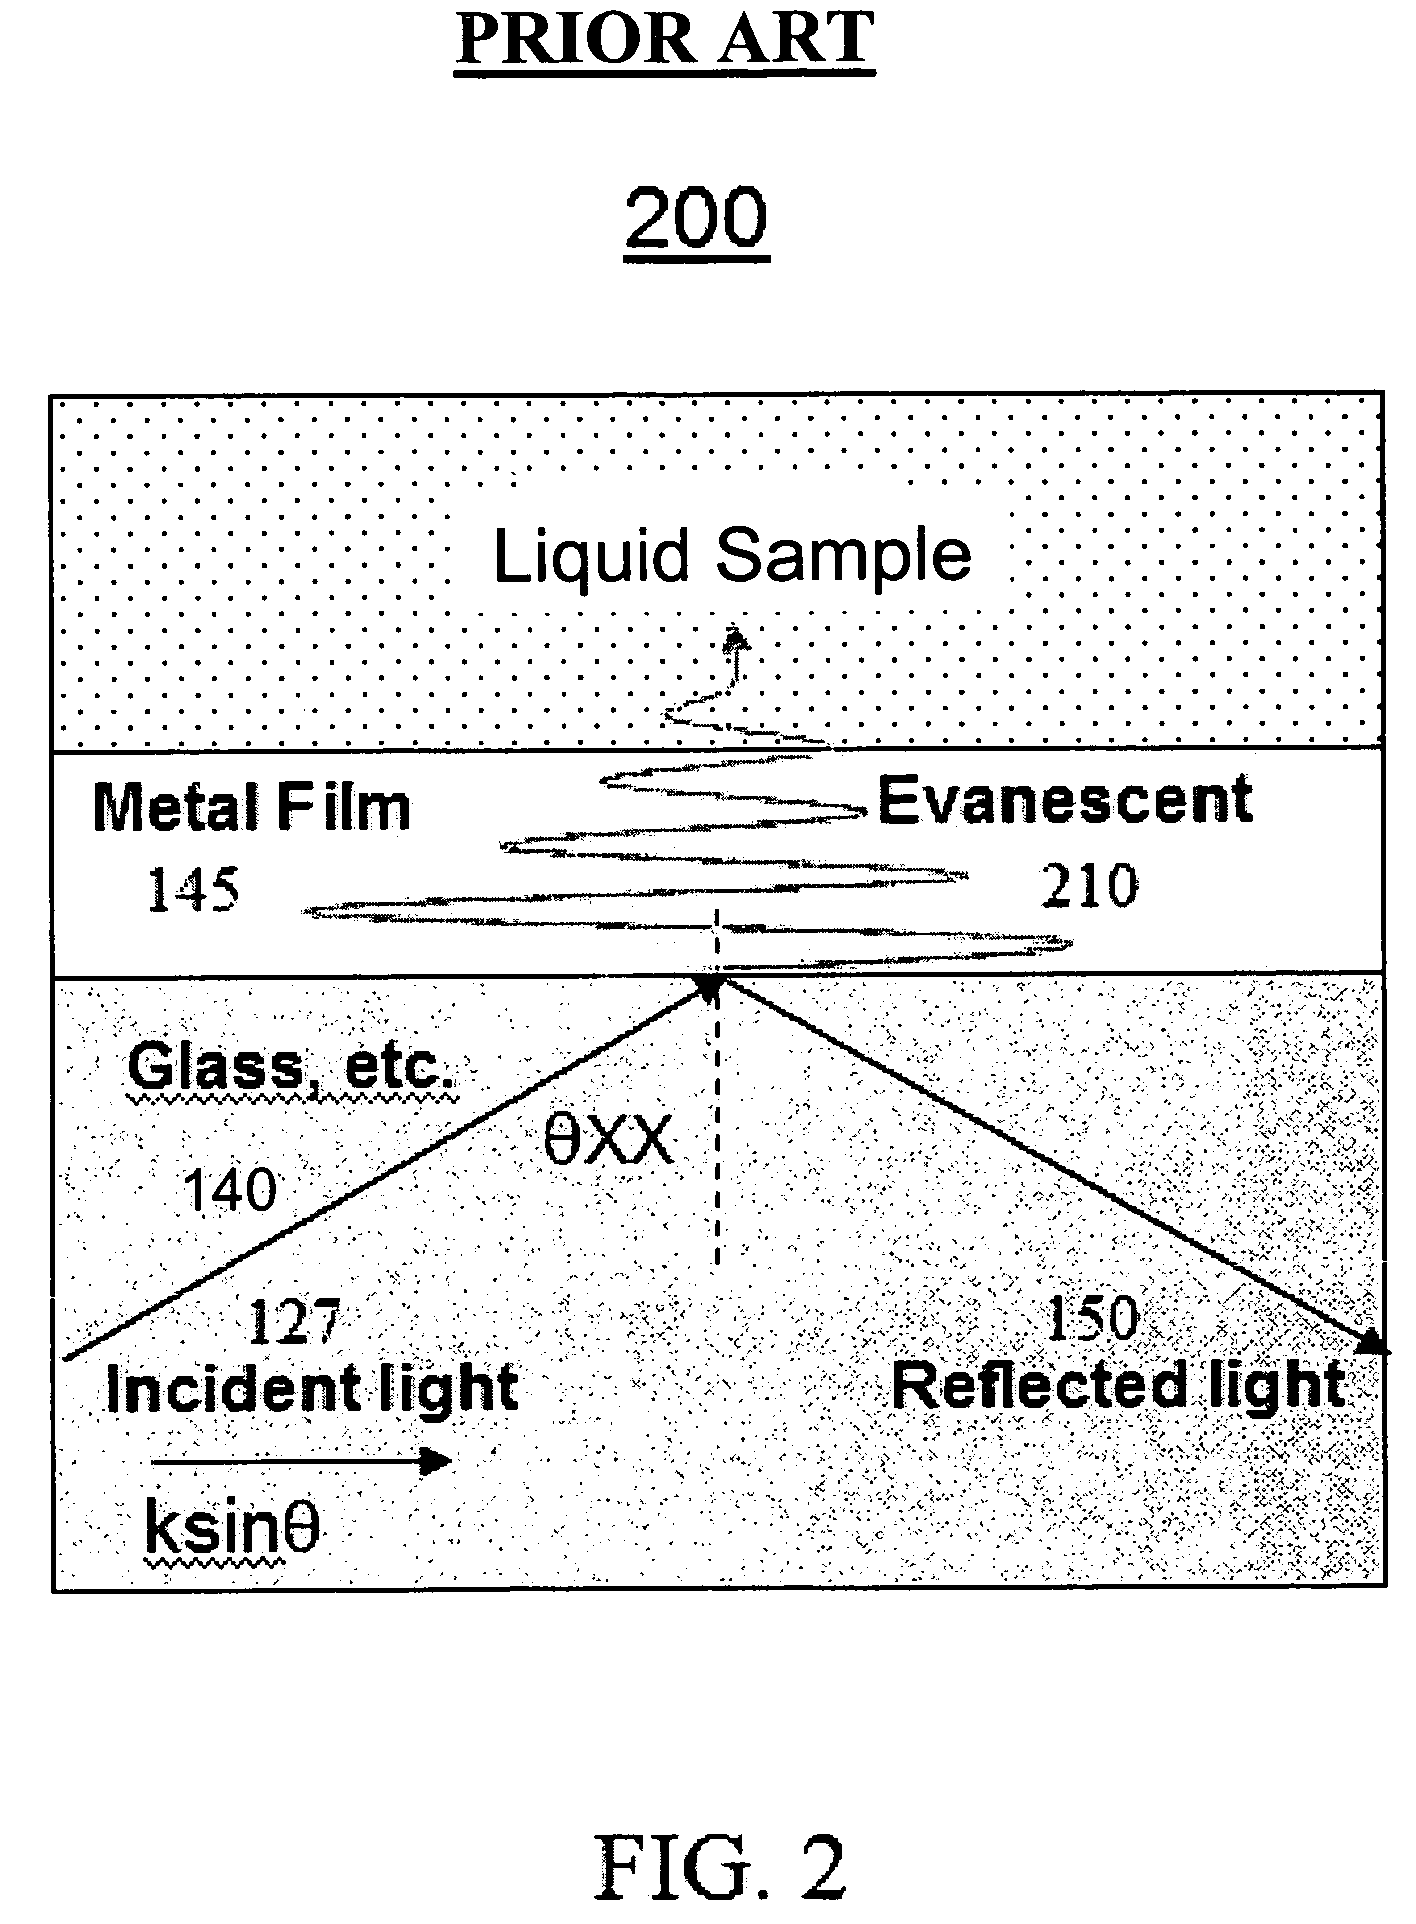 Metal ion concentration analysis for liquids